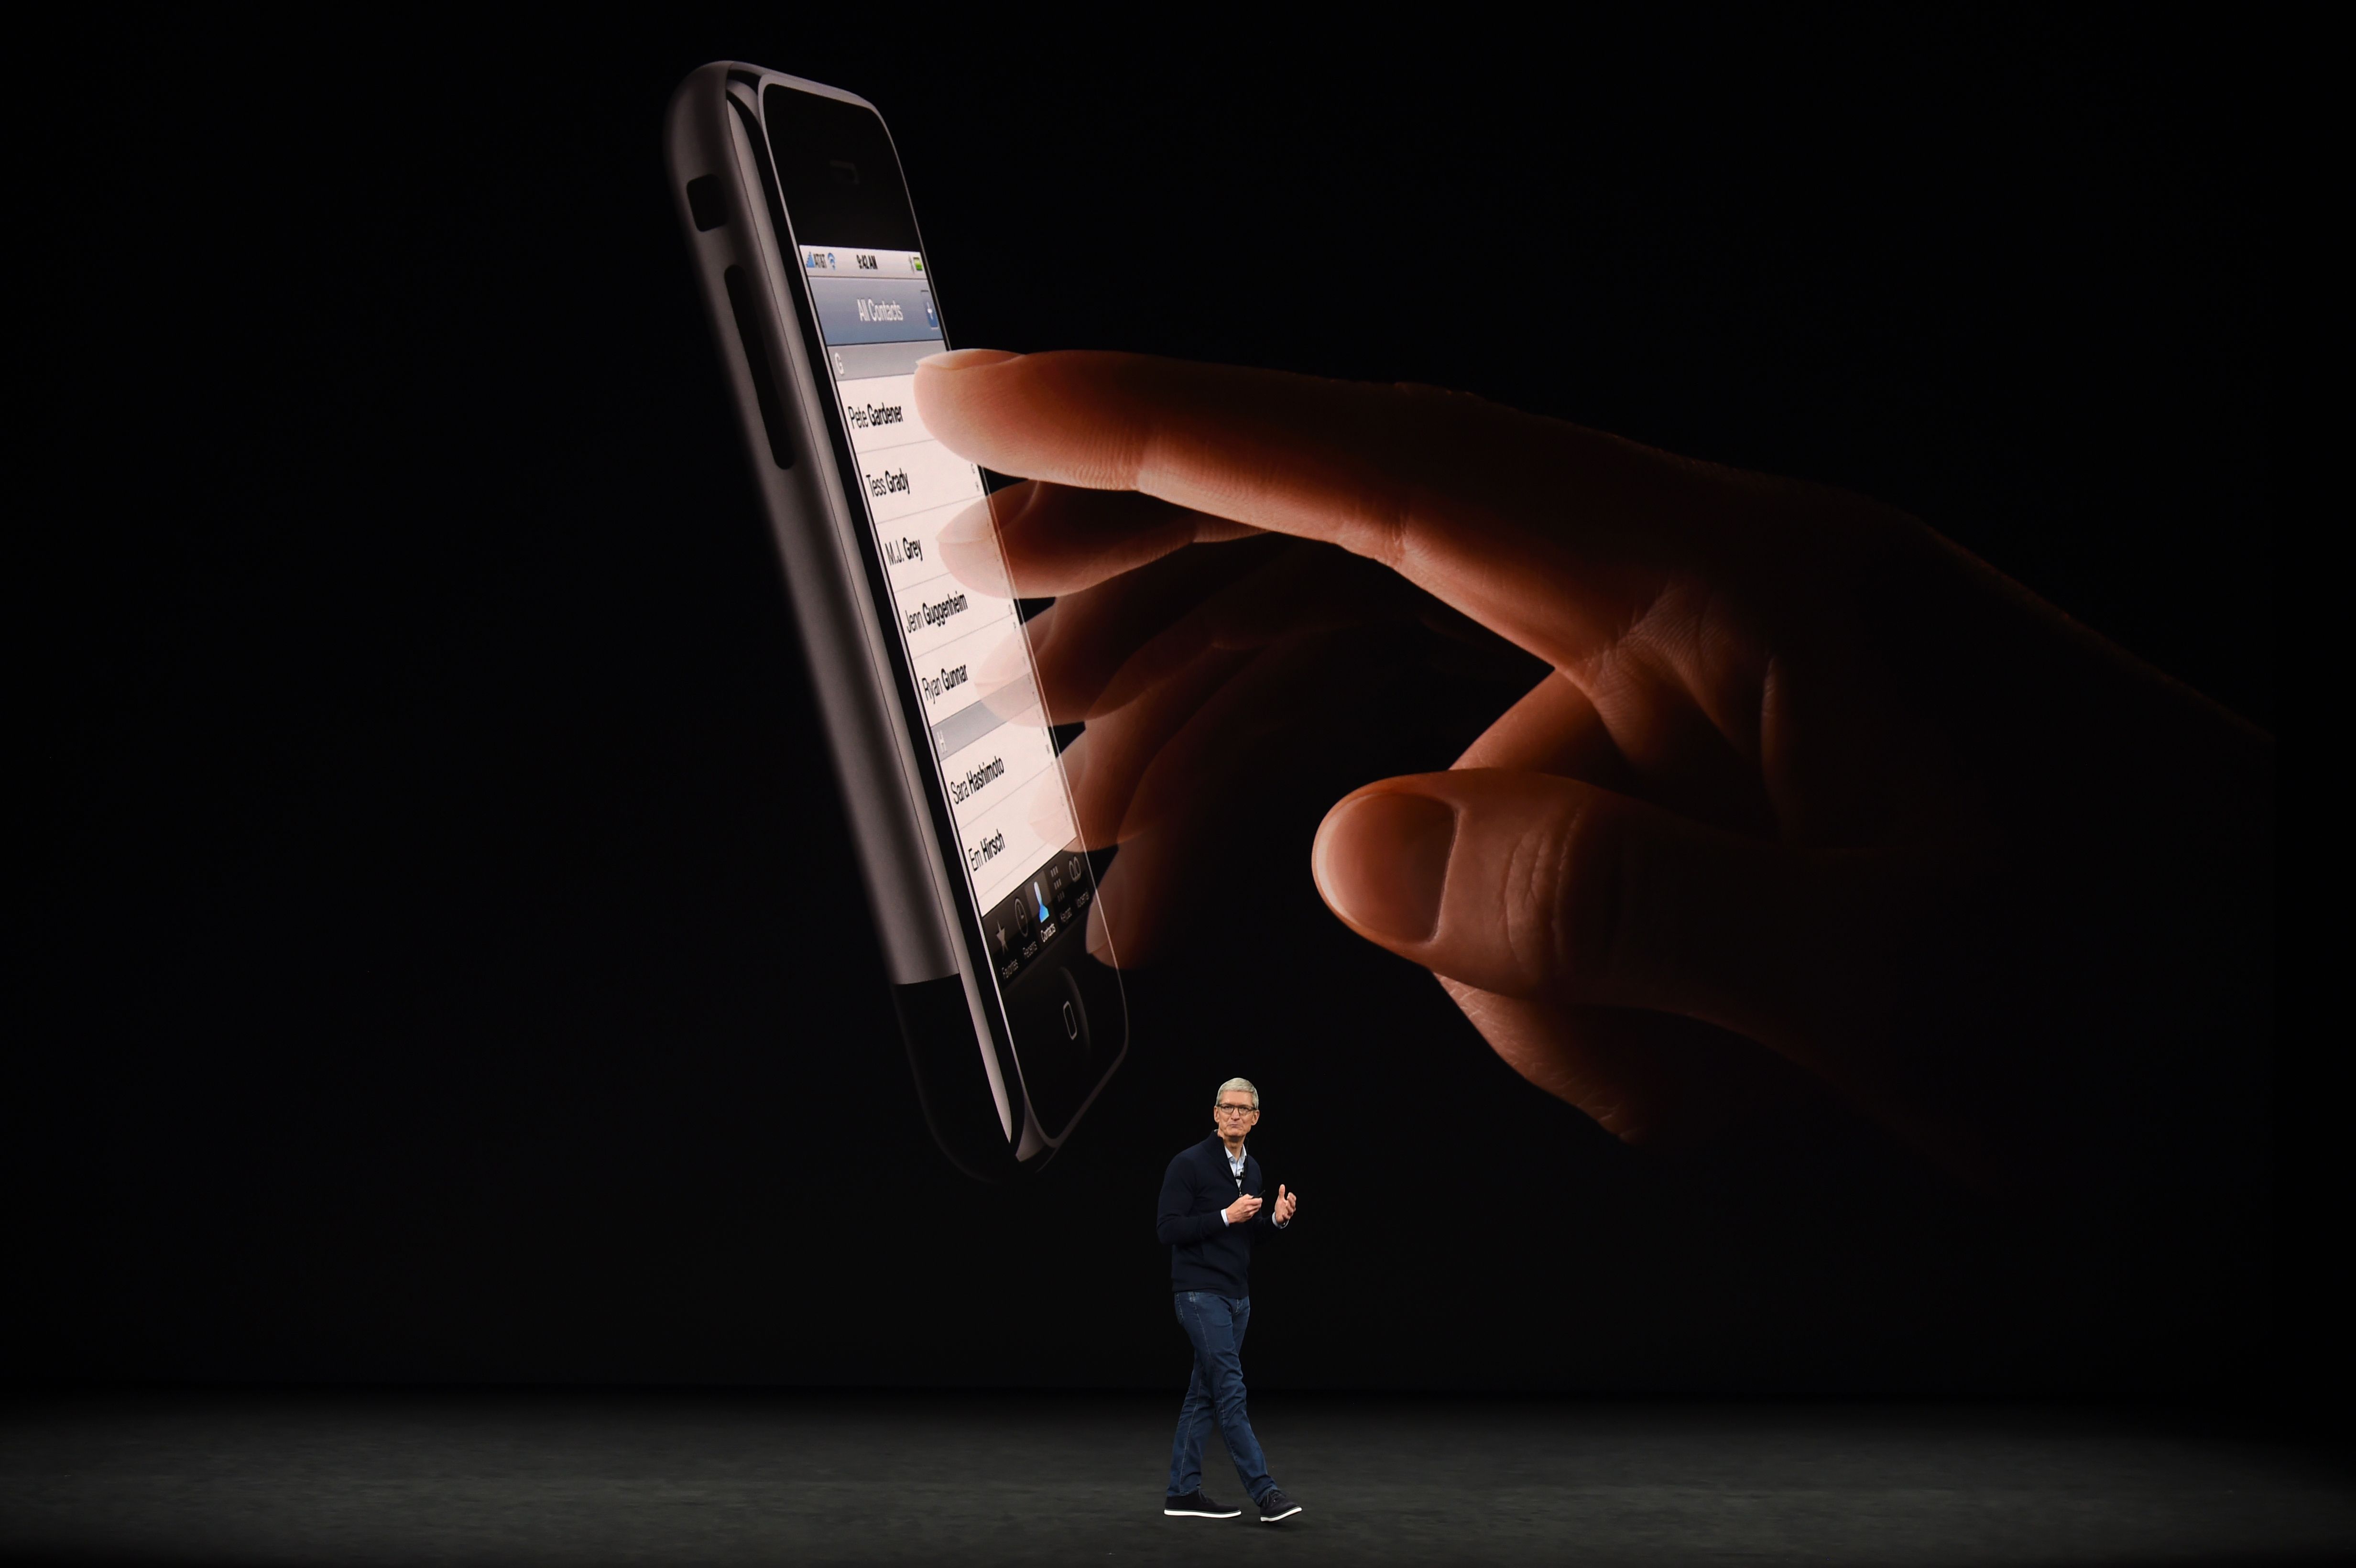 Apple CEO Tim Cook speaks about the new iPhone 8 during a media event at Apple's new headquarters in Cupertino, Calif., on Sept. 12, 2017. (JOSH EDELSON/AFP/Getty Images)